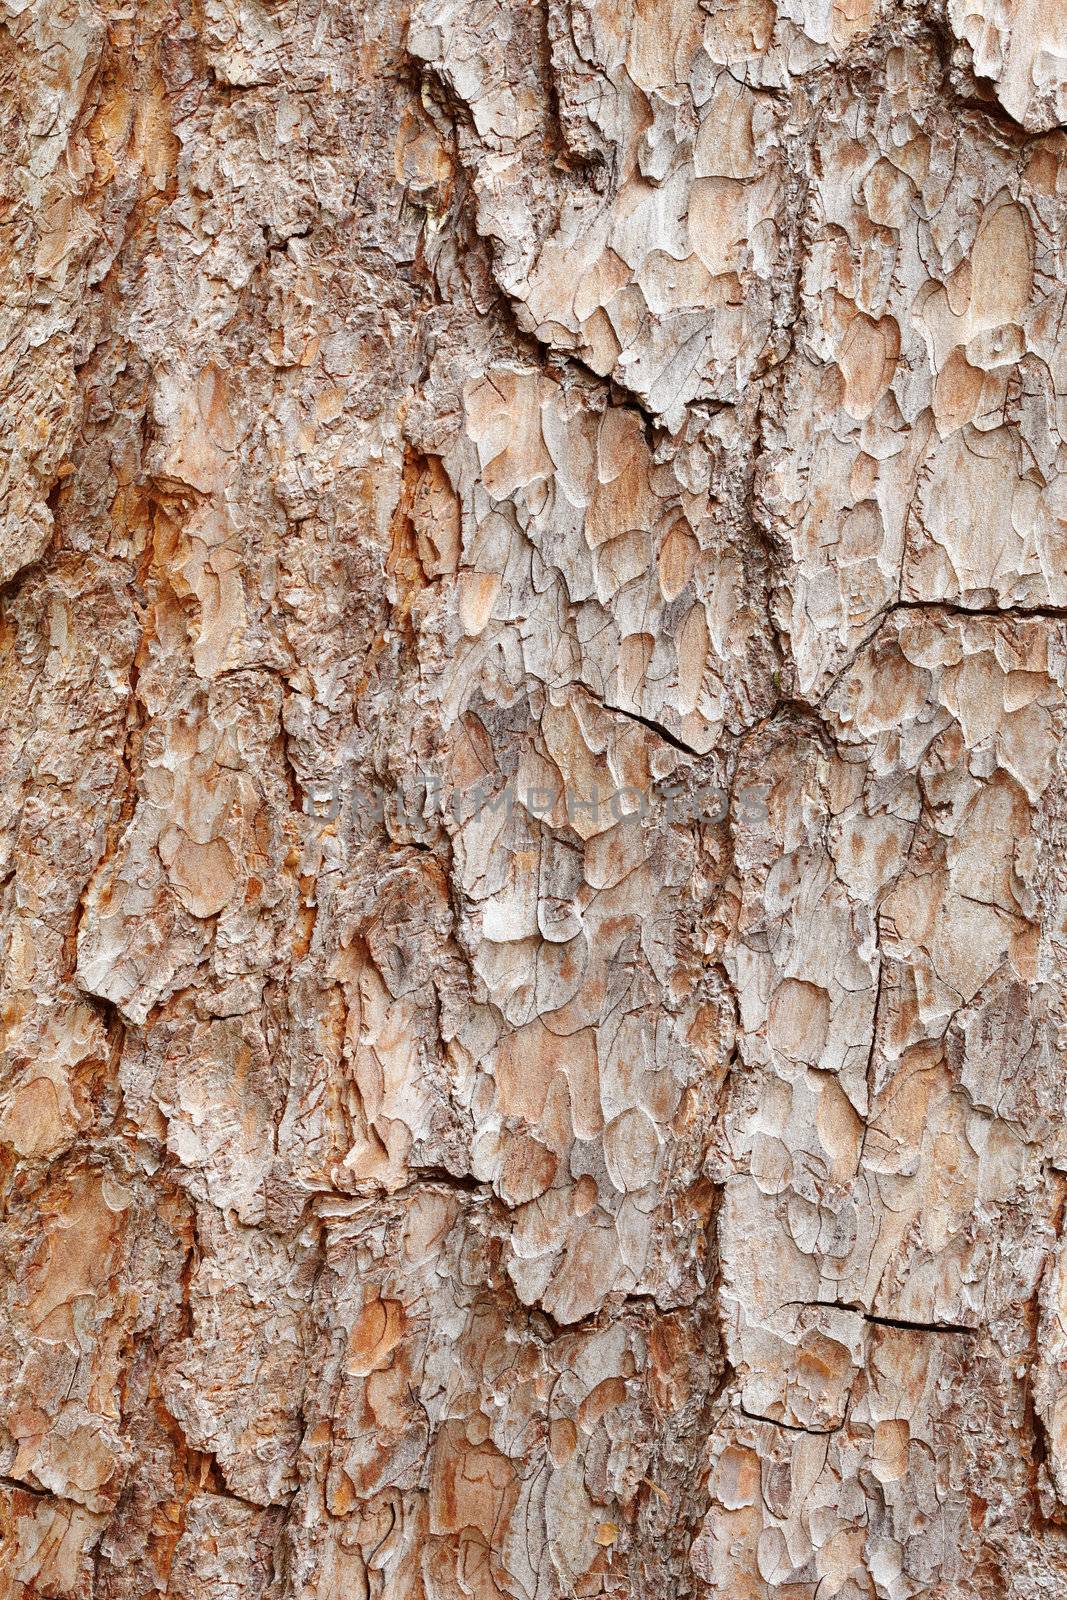 Surface of brown rough bark of pine tree - texture